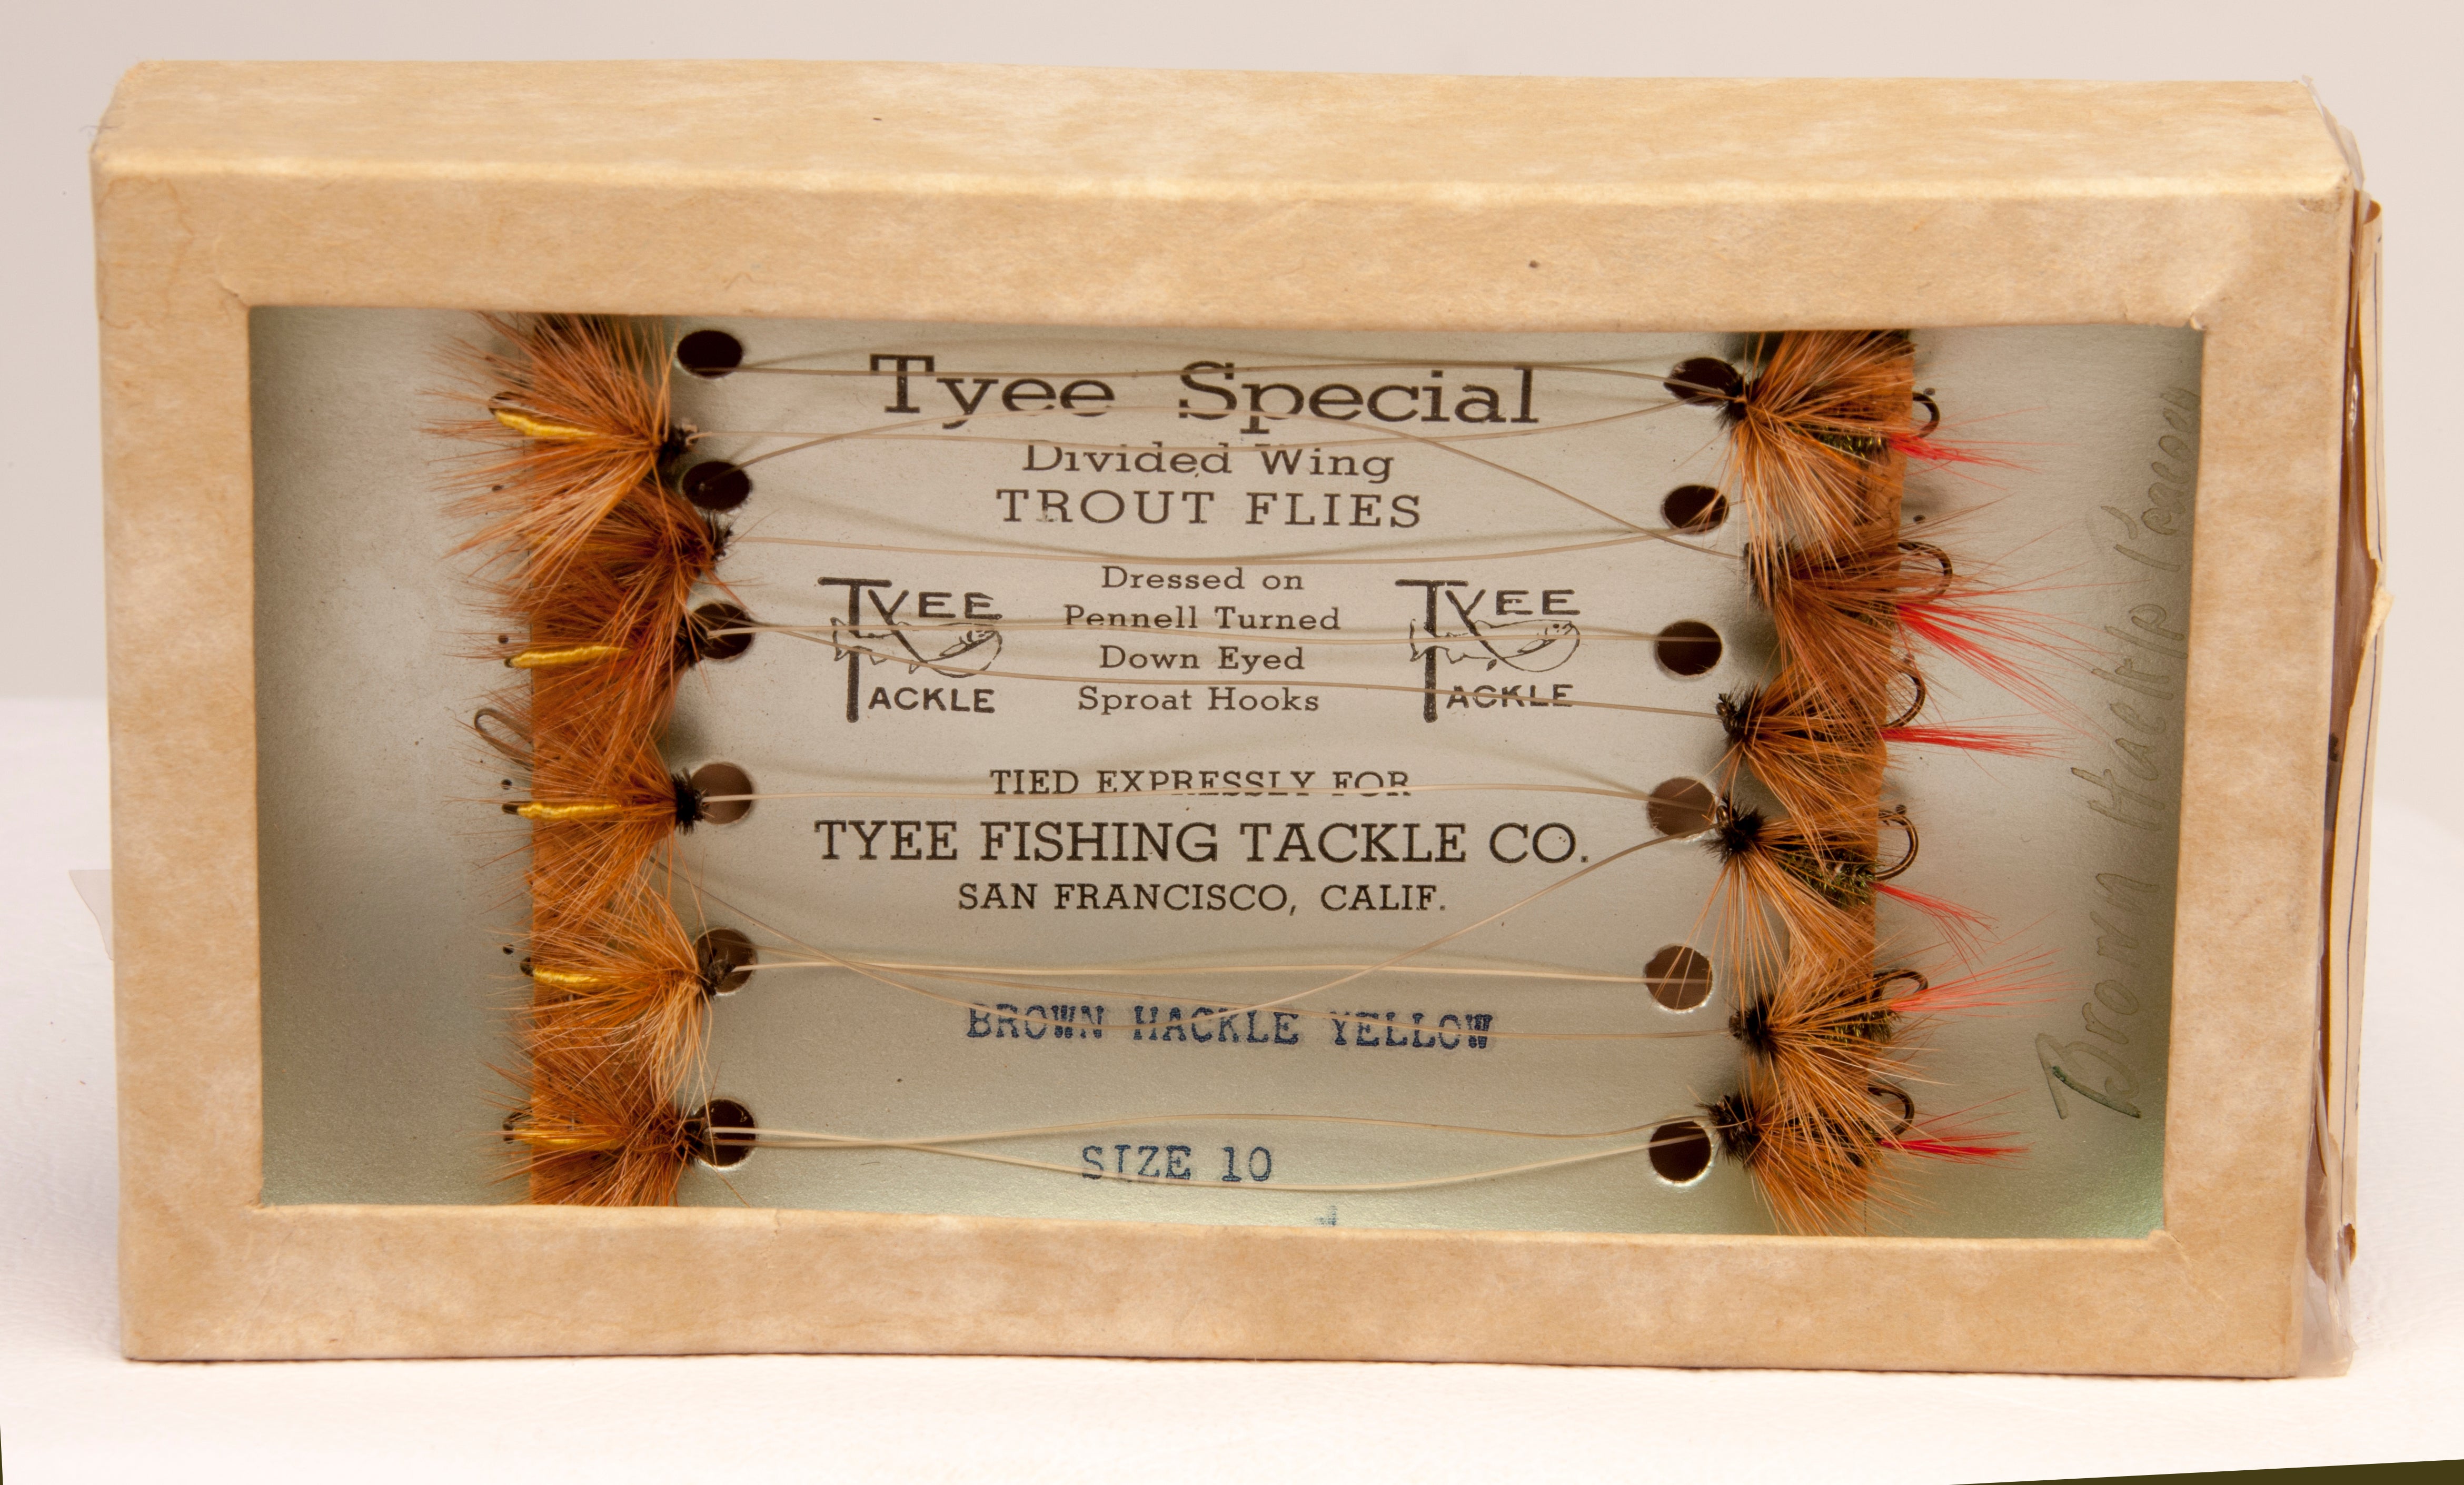 Box of Divided Wing Trout Flies Fly Fishing Tackle